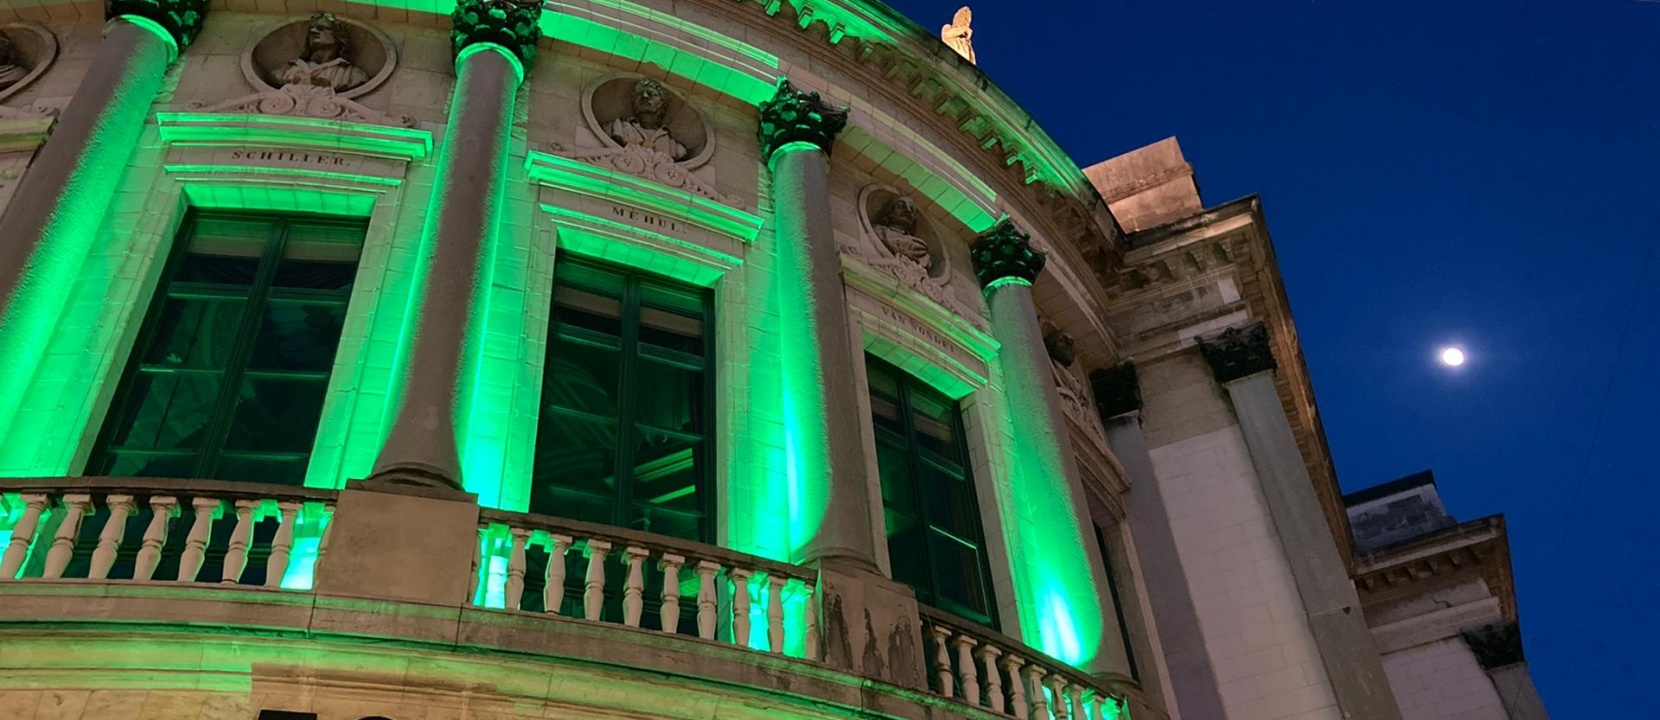 Give culture the green light!